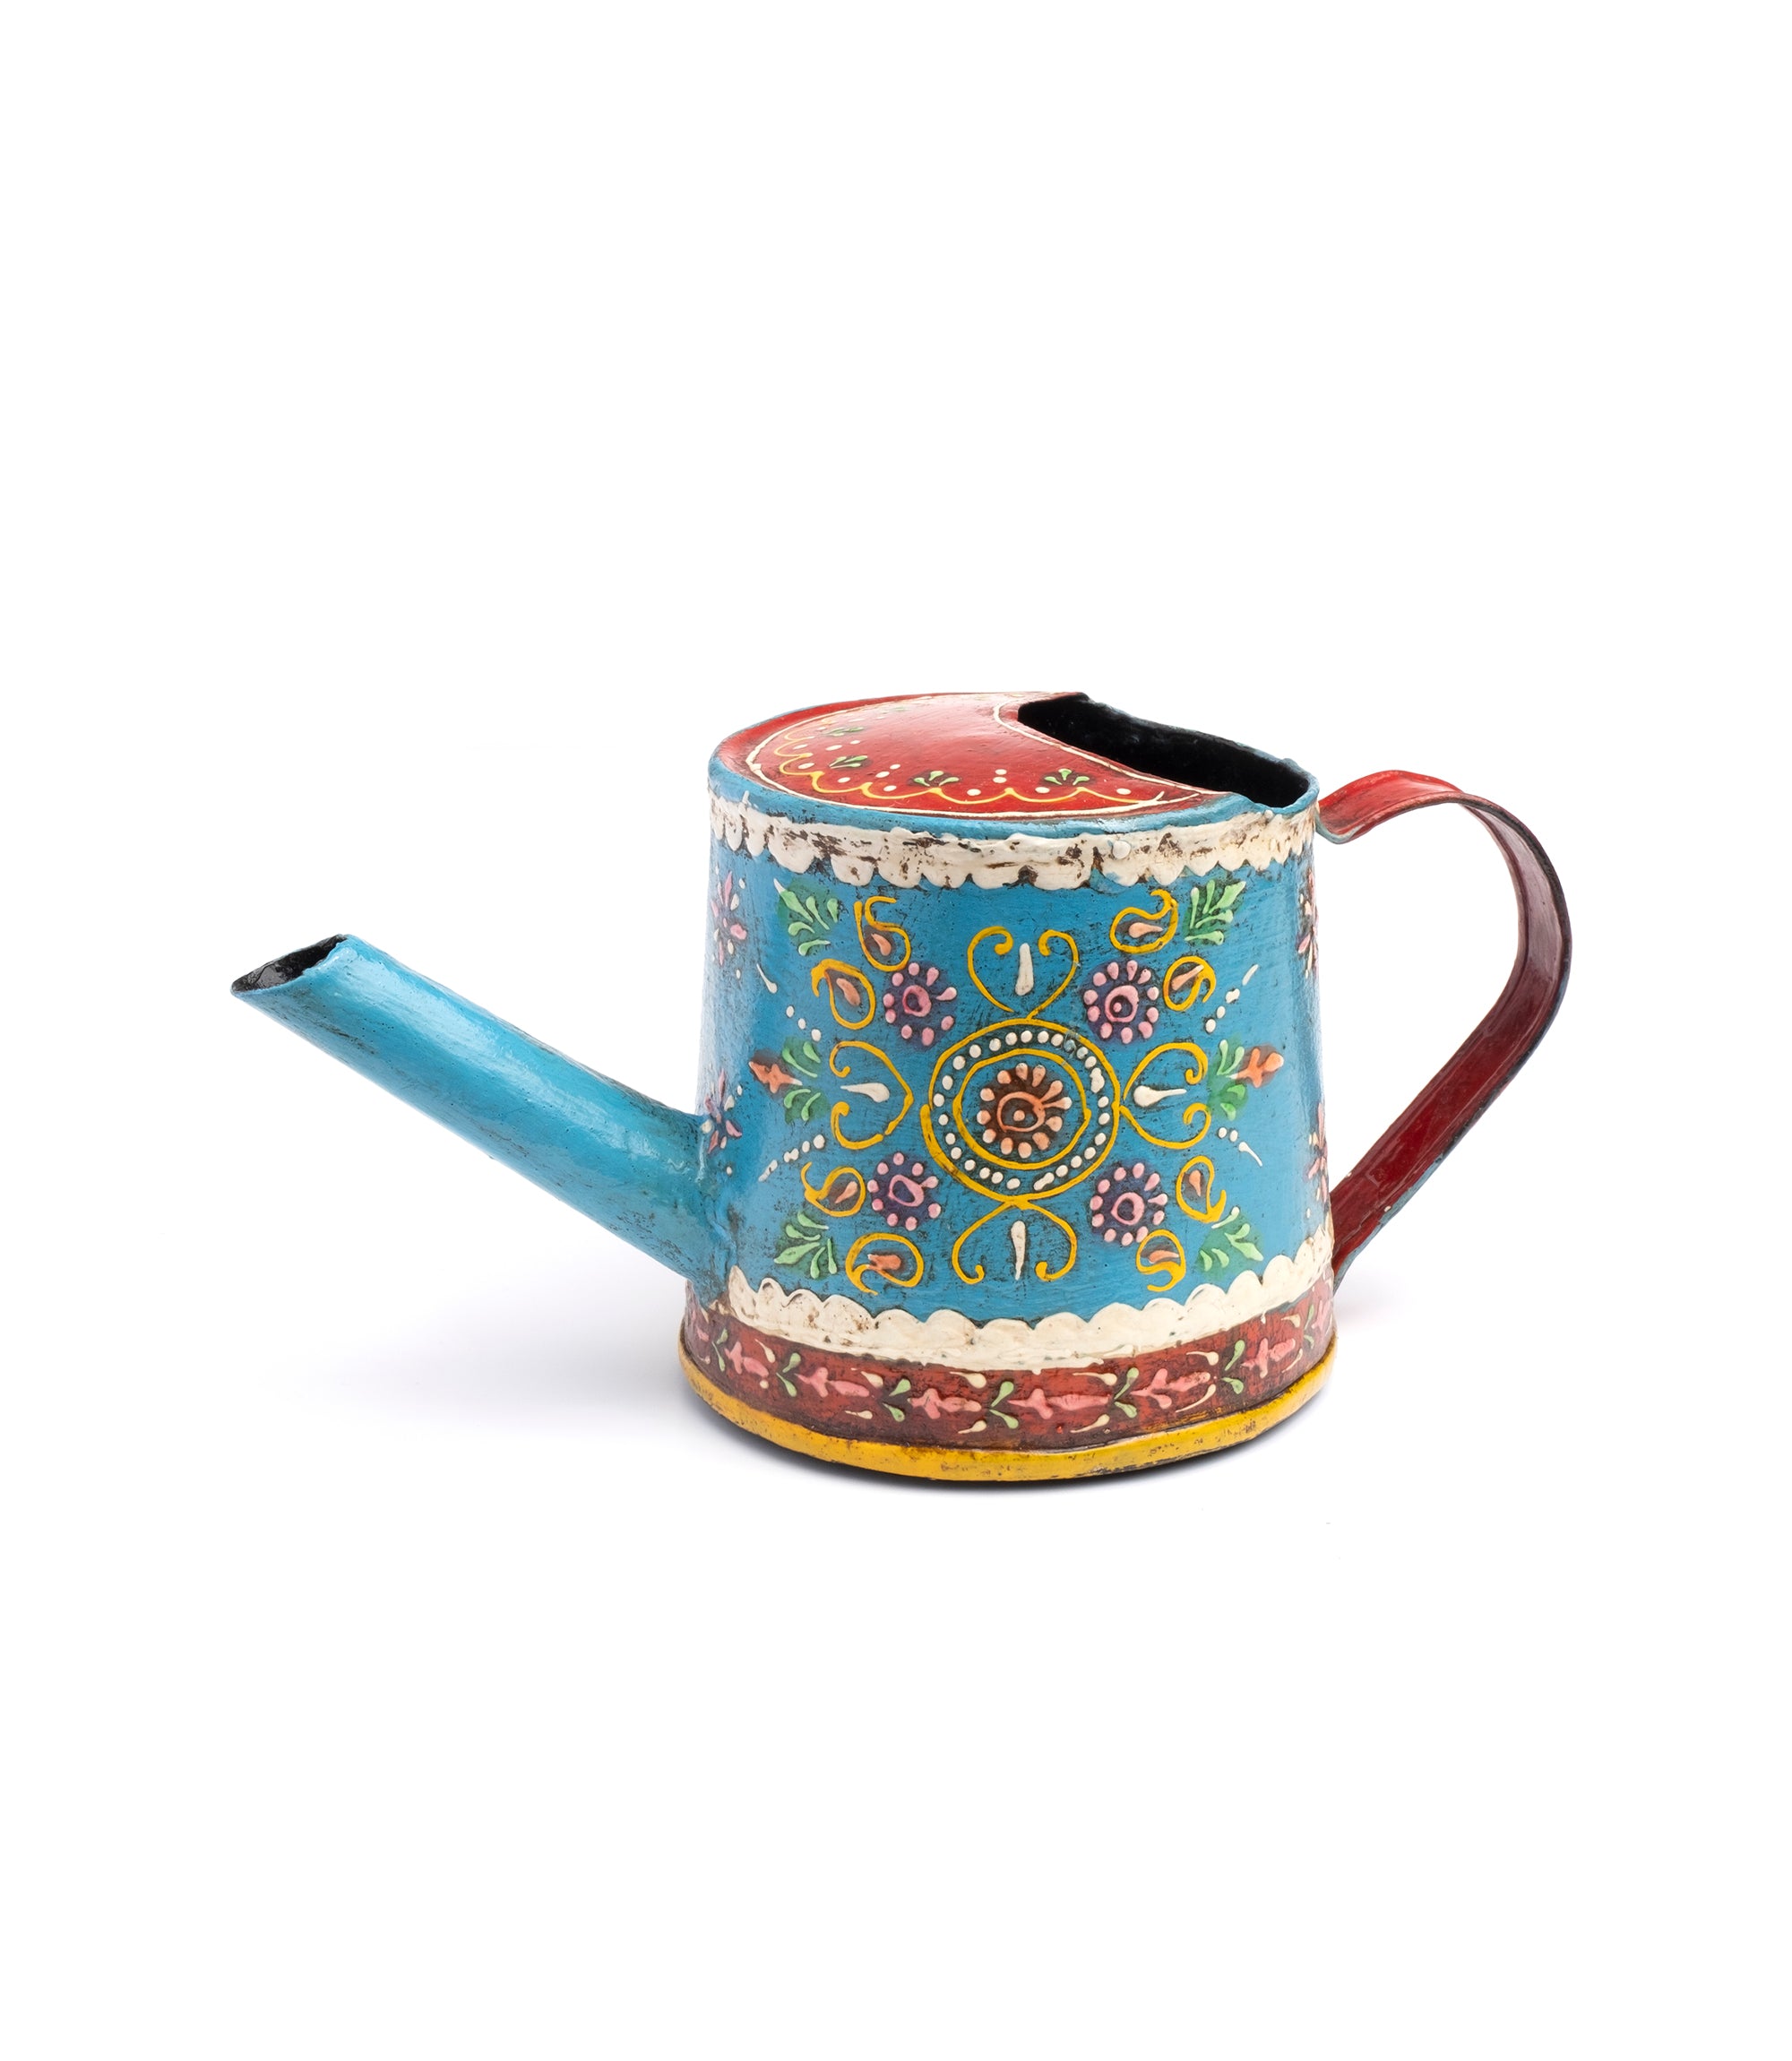 Mini painted watering can